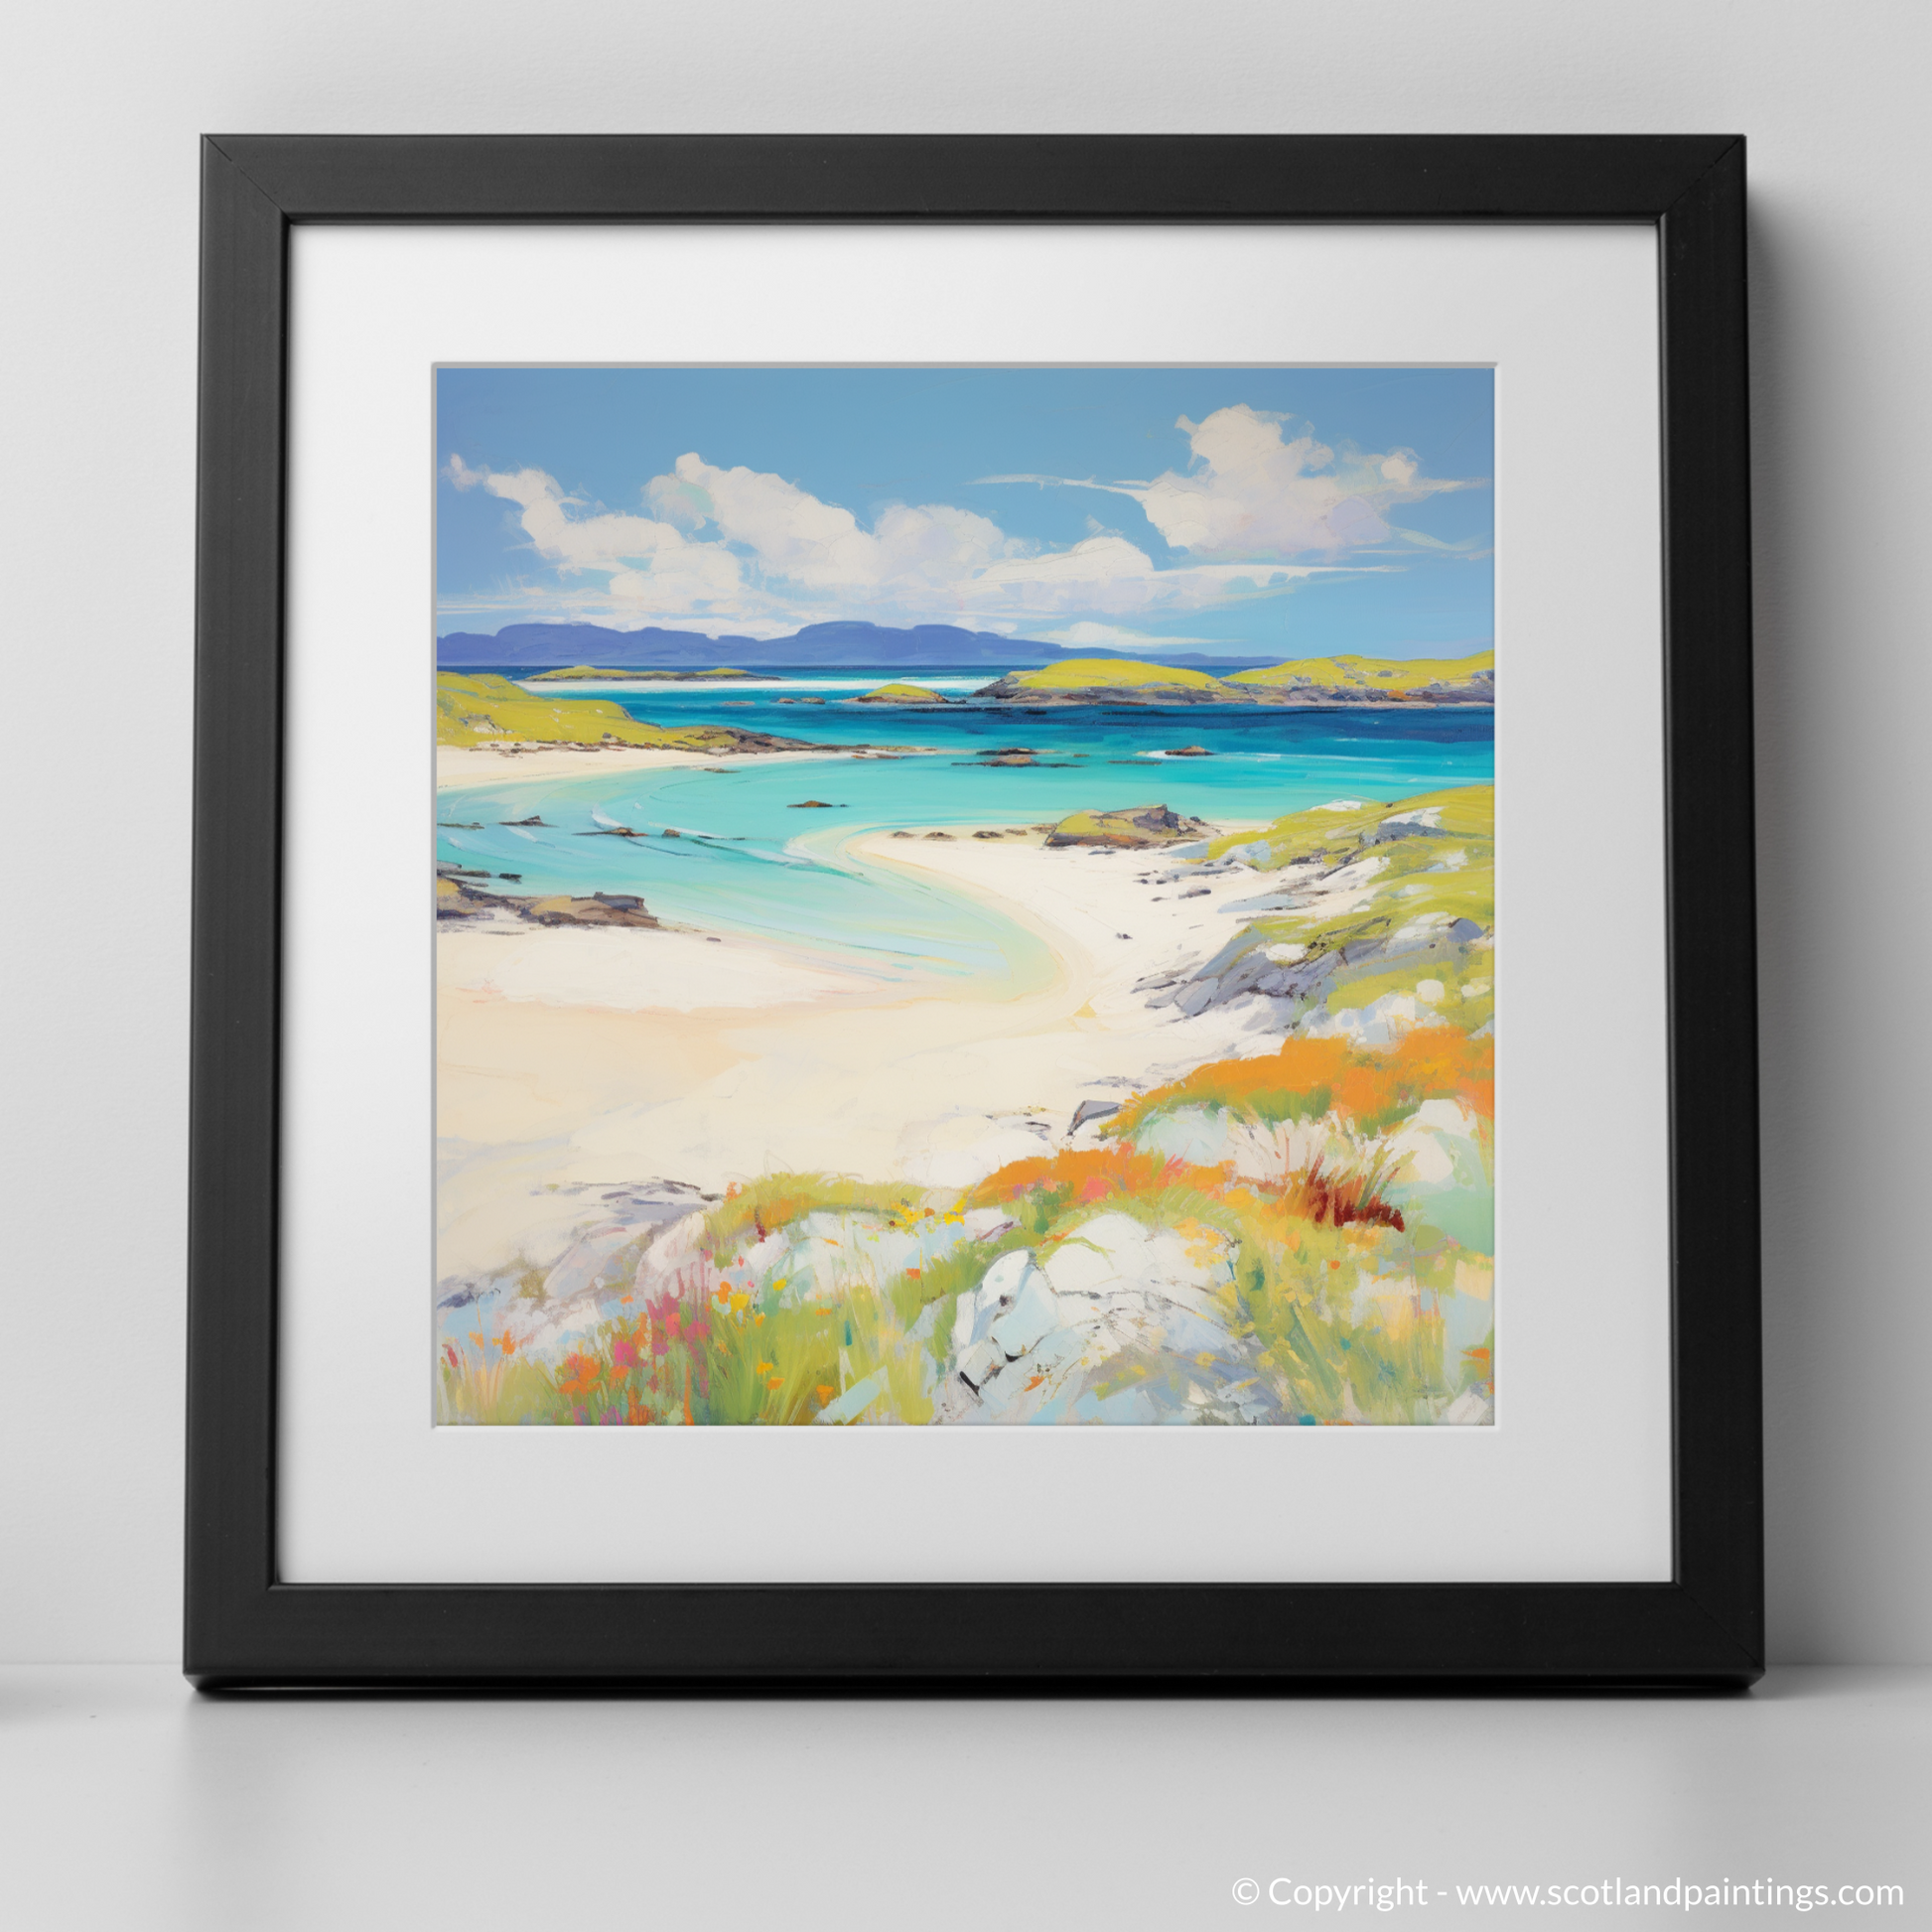 Art Print of Mellon Udrigle Beach, Wester Ross in summer with a black frame